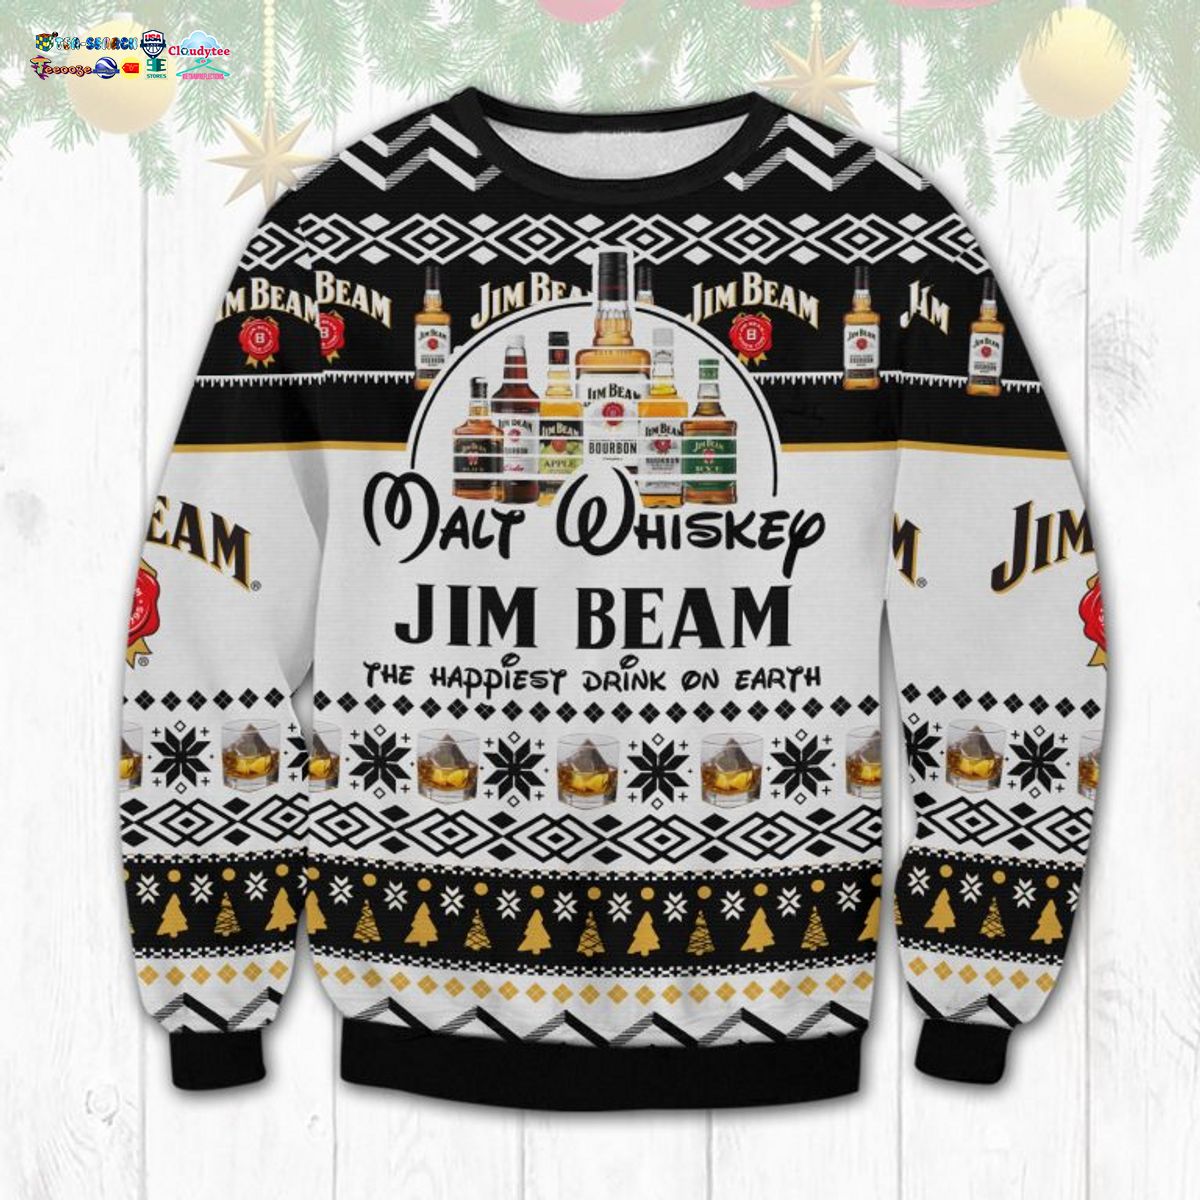 Jim Beam The Happiest Drink On Earth Ugly Christmas Sweater - Loving click